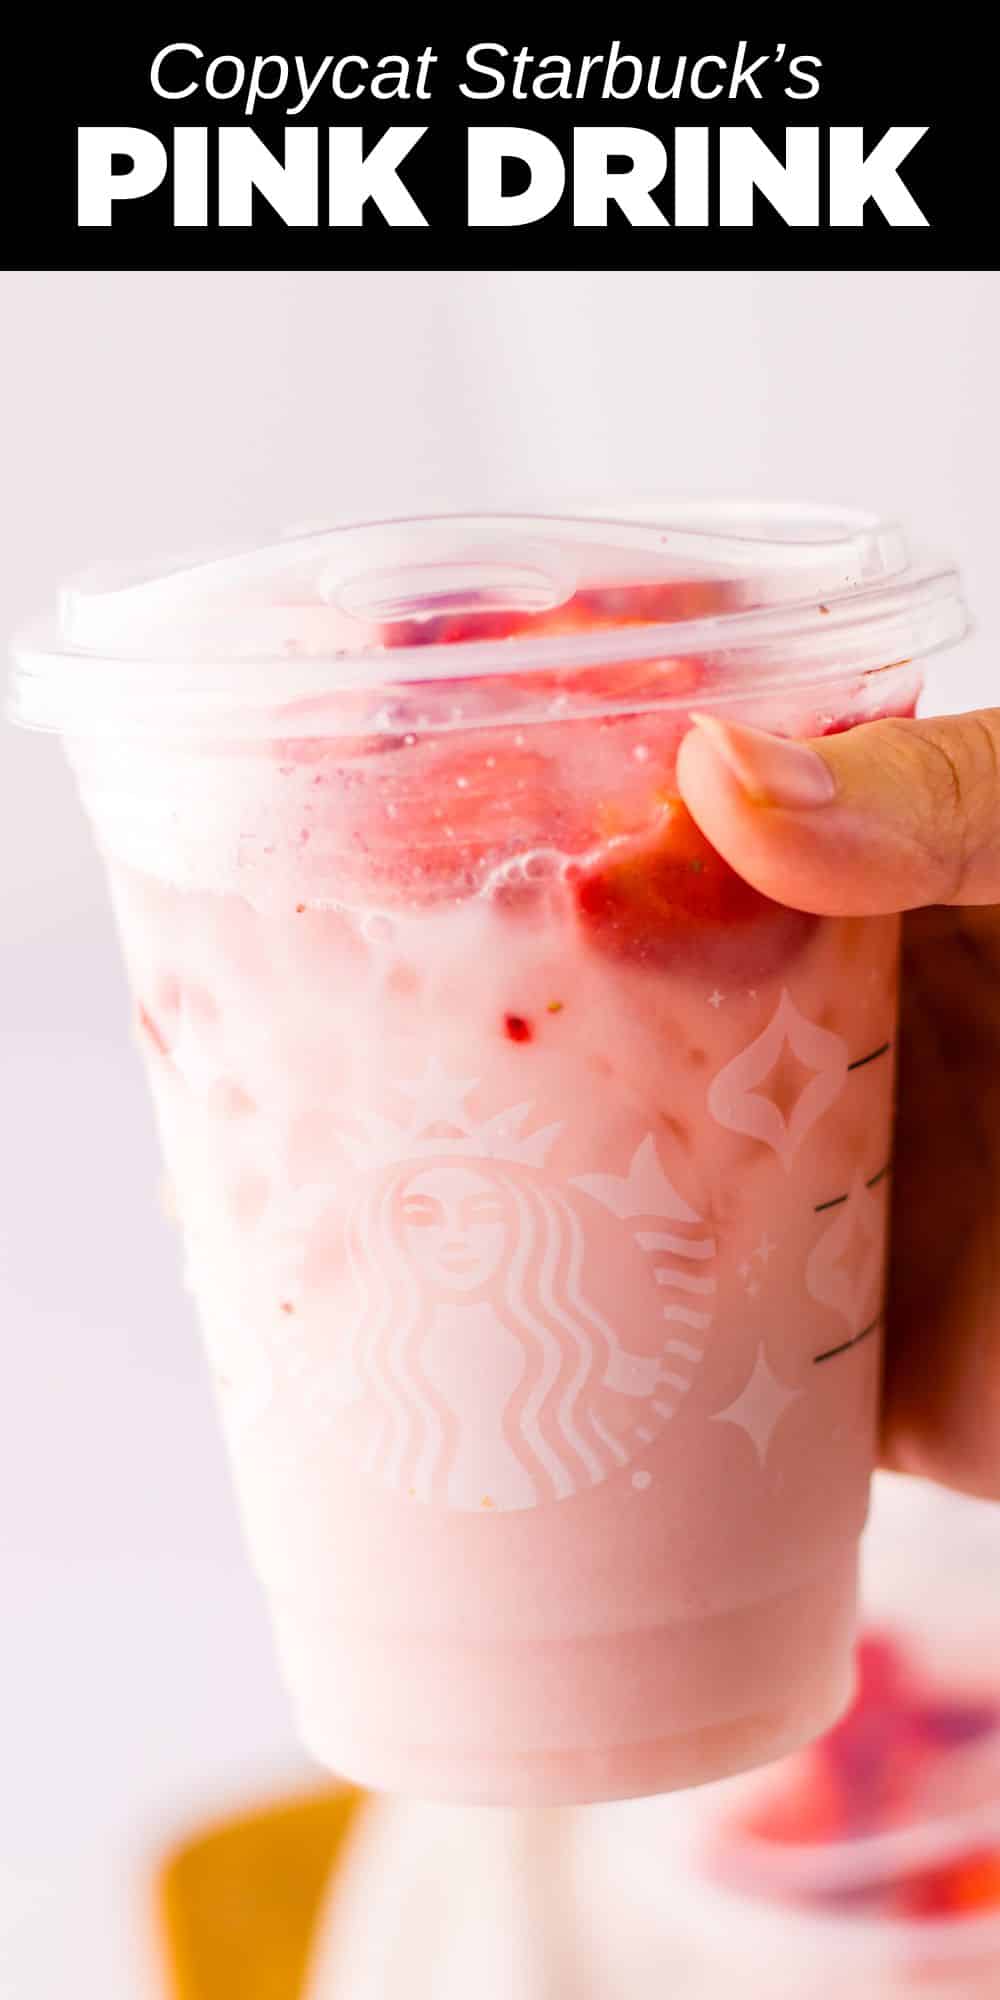 We've perfected the Starbuck's famous Pink drink with our Copycat Starbucks Pink Drink recipe. You'll get the same vibrant pink color and delicious flavors as the Starbucks original while sparing your wallet from coffee shop prices. We figured out how to make it with just three simple ingredients so you can mix up this refreshing drink anytime the craving hits.